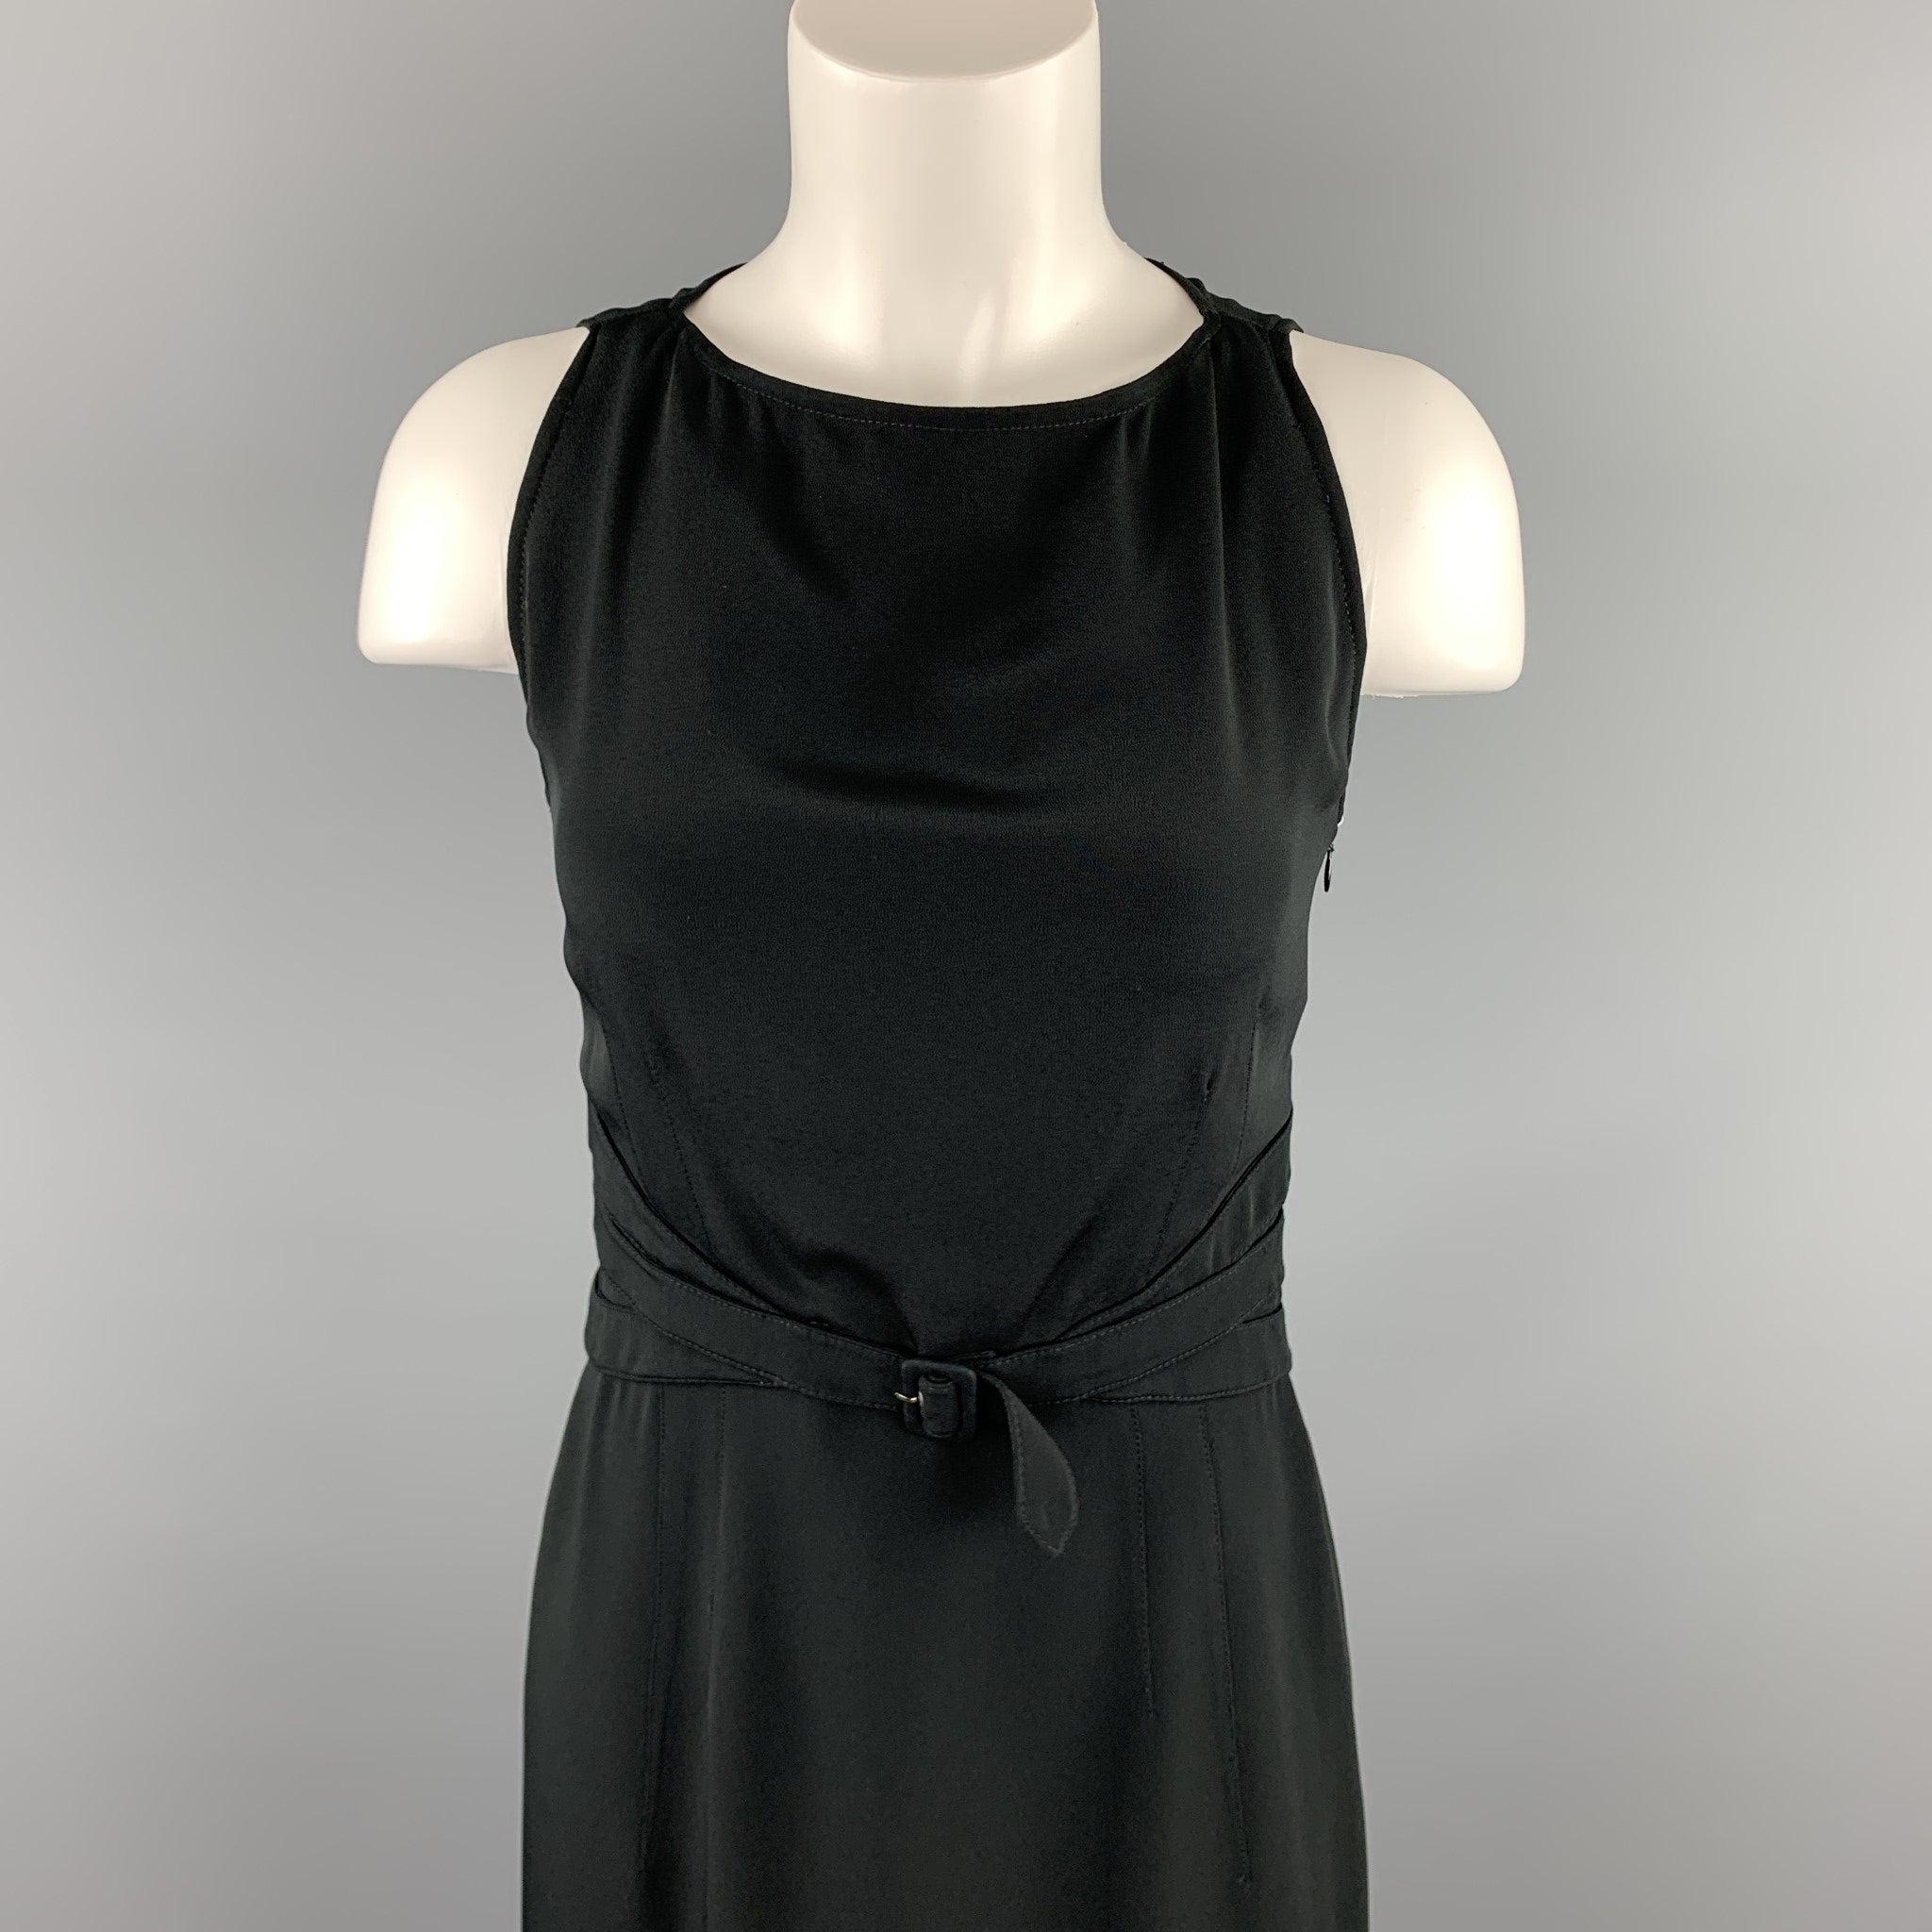 VALENTINO cocktail dress comes in a black acetate / silk featuring a sheath style, self belt detail, and a back zip up closure. Made in Italy.Very Good
Pre-Owned Condition. 

Marked:  6 

Measurements: 
 
Shoulder: 11.5 inches 
Bust: 32 inches